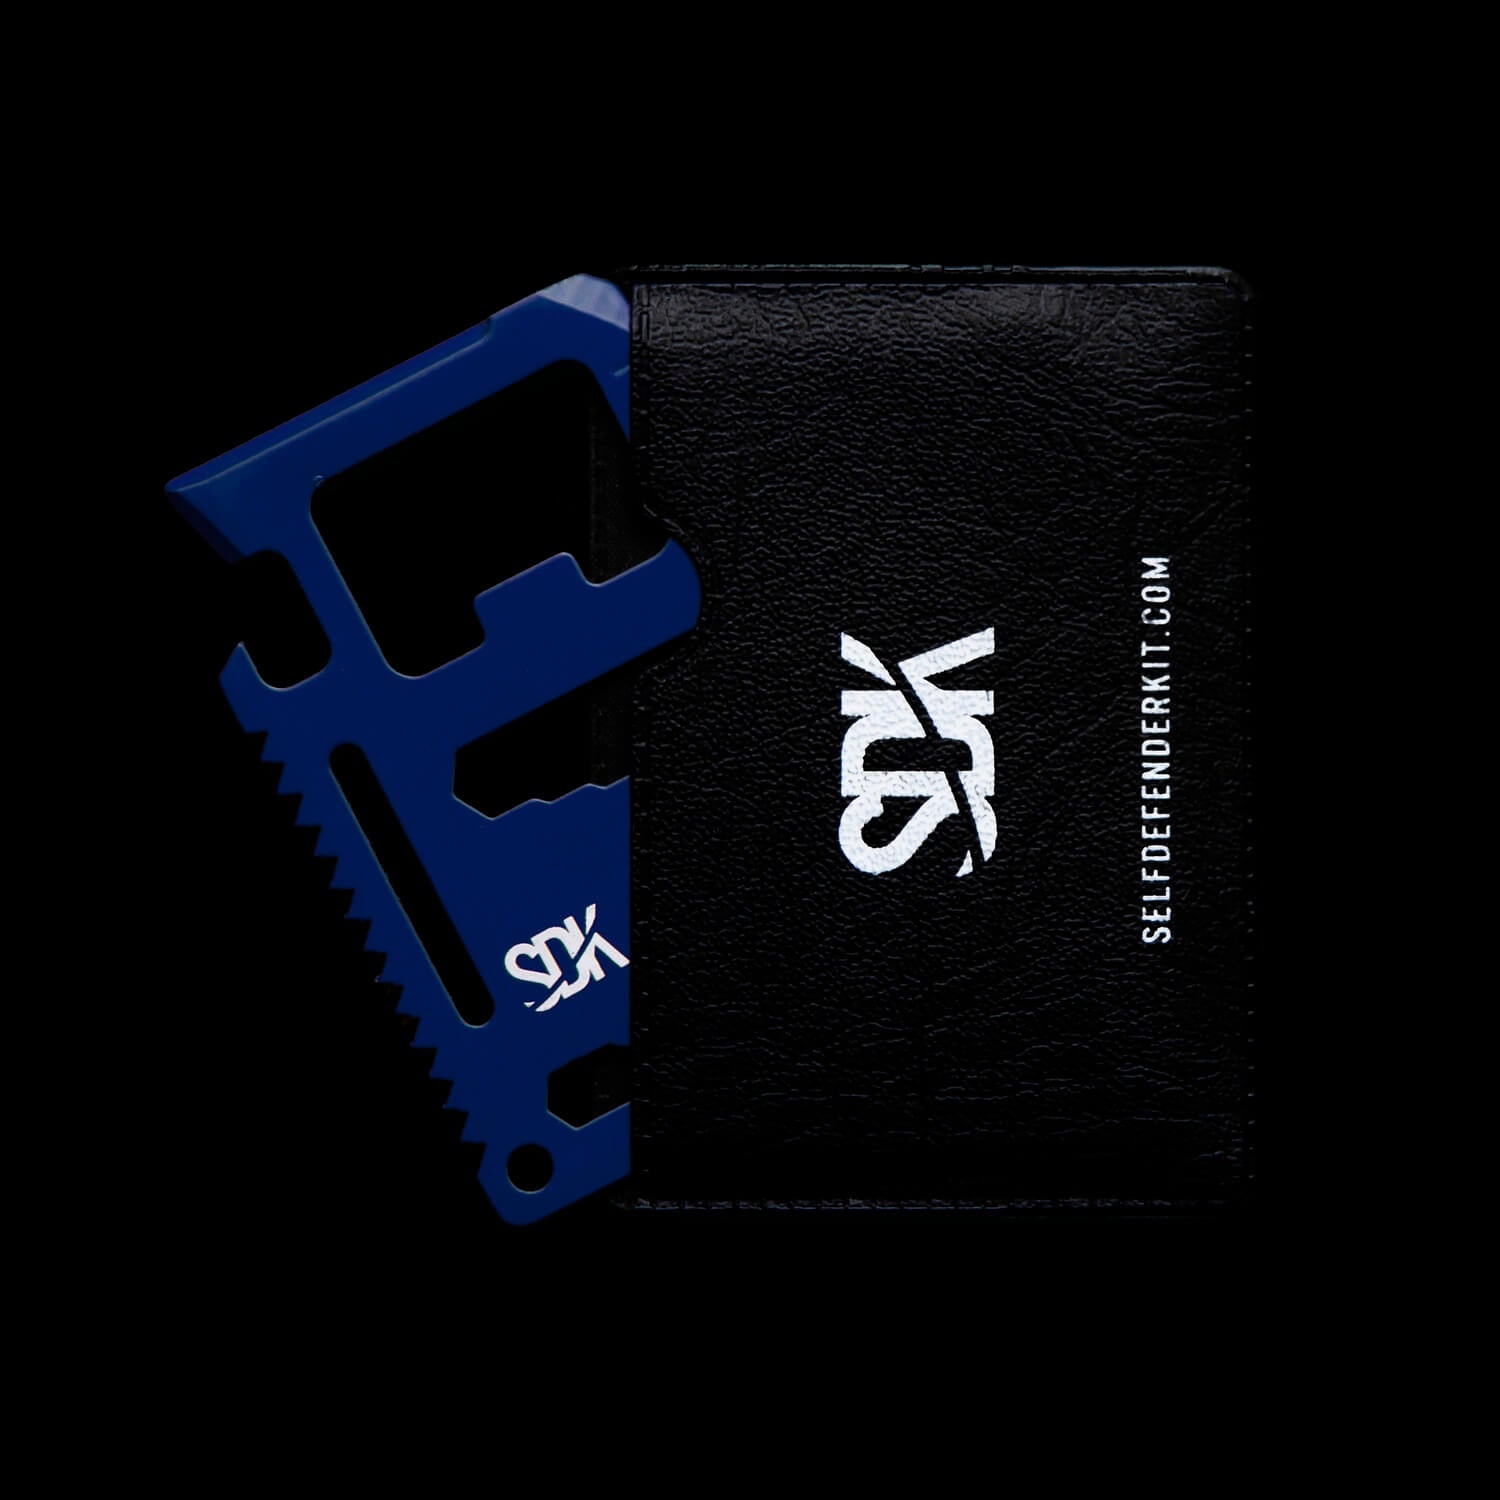 SDK Multi Card Tool, Blue with card holder (credit card sized stainless steel tool with 10 functions: Can opener, Knife edge, Screwdriver, Ruler, Cap opener, 2 Position wrench, 4 Position wrench, Butterfly wrench, Saw blade and Direction ancillary indication)